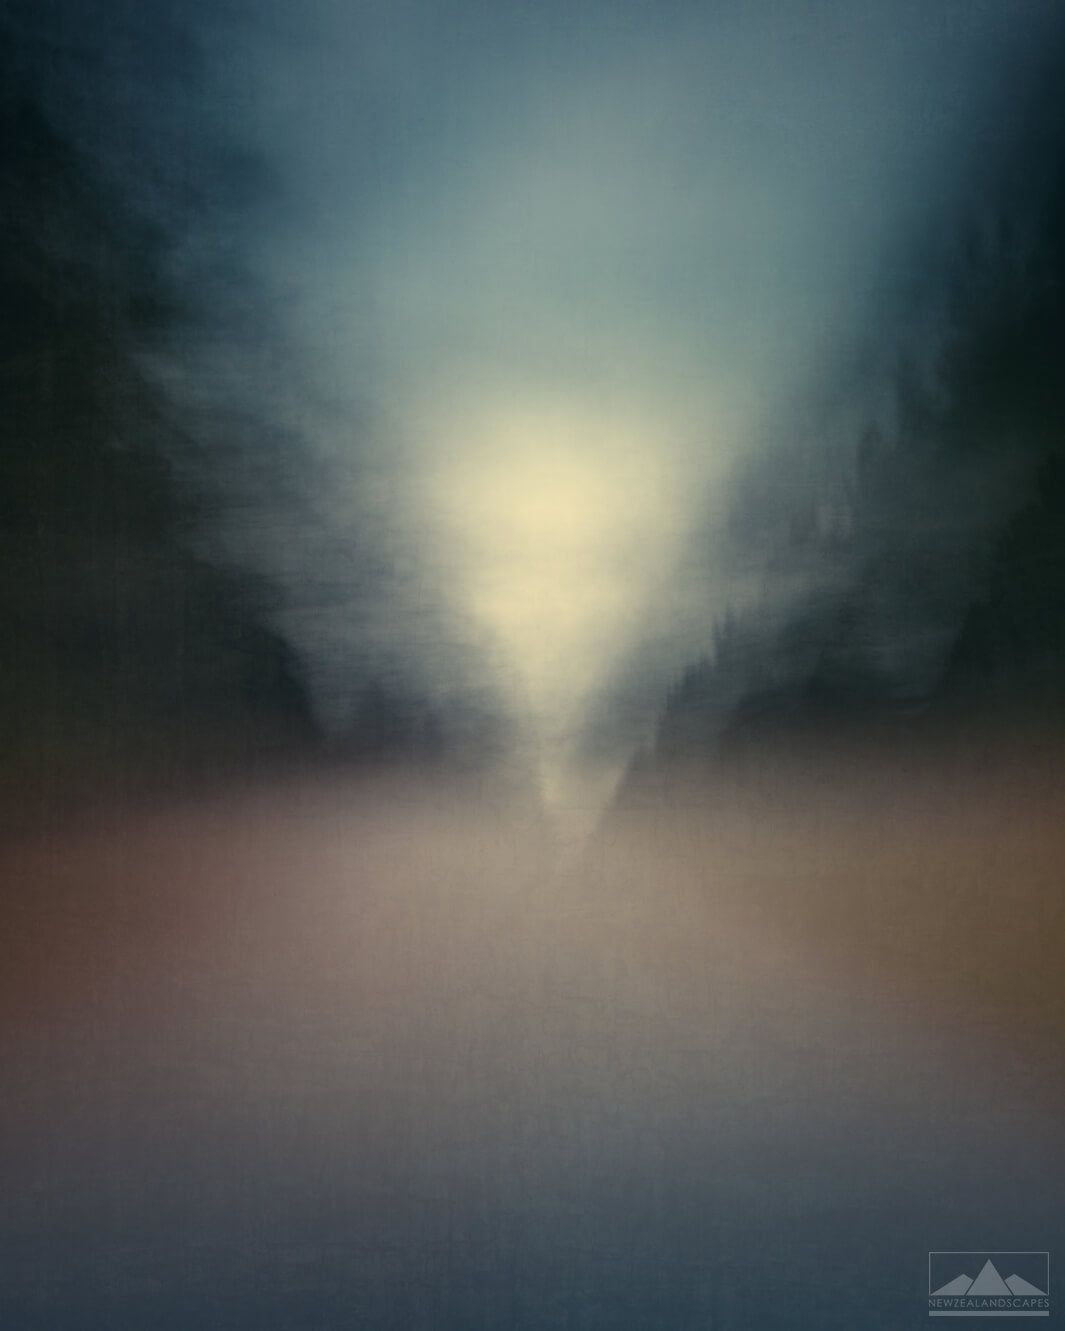 Abstract impressionist style blurred photo of a road inbetween trees, with sky and sunlight in the distance.